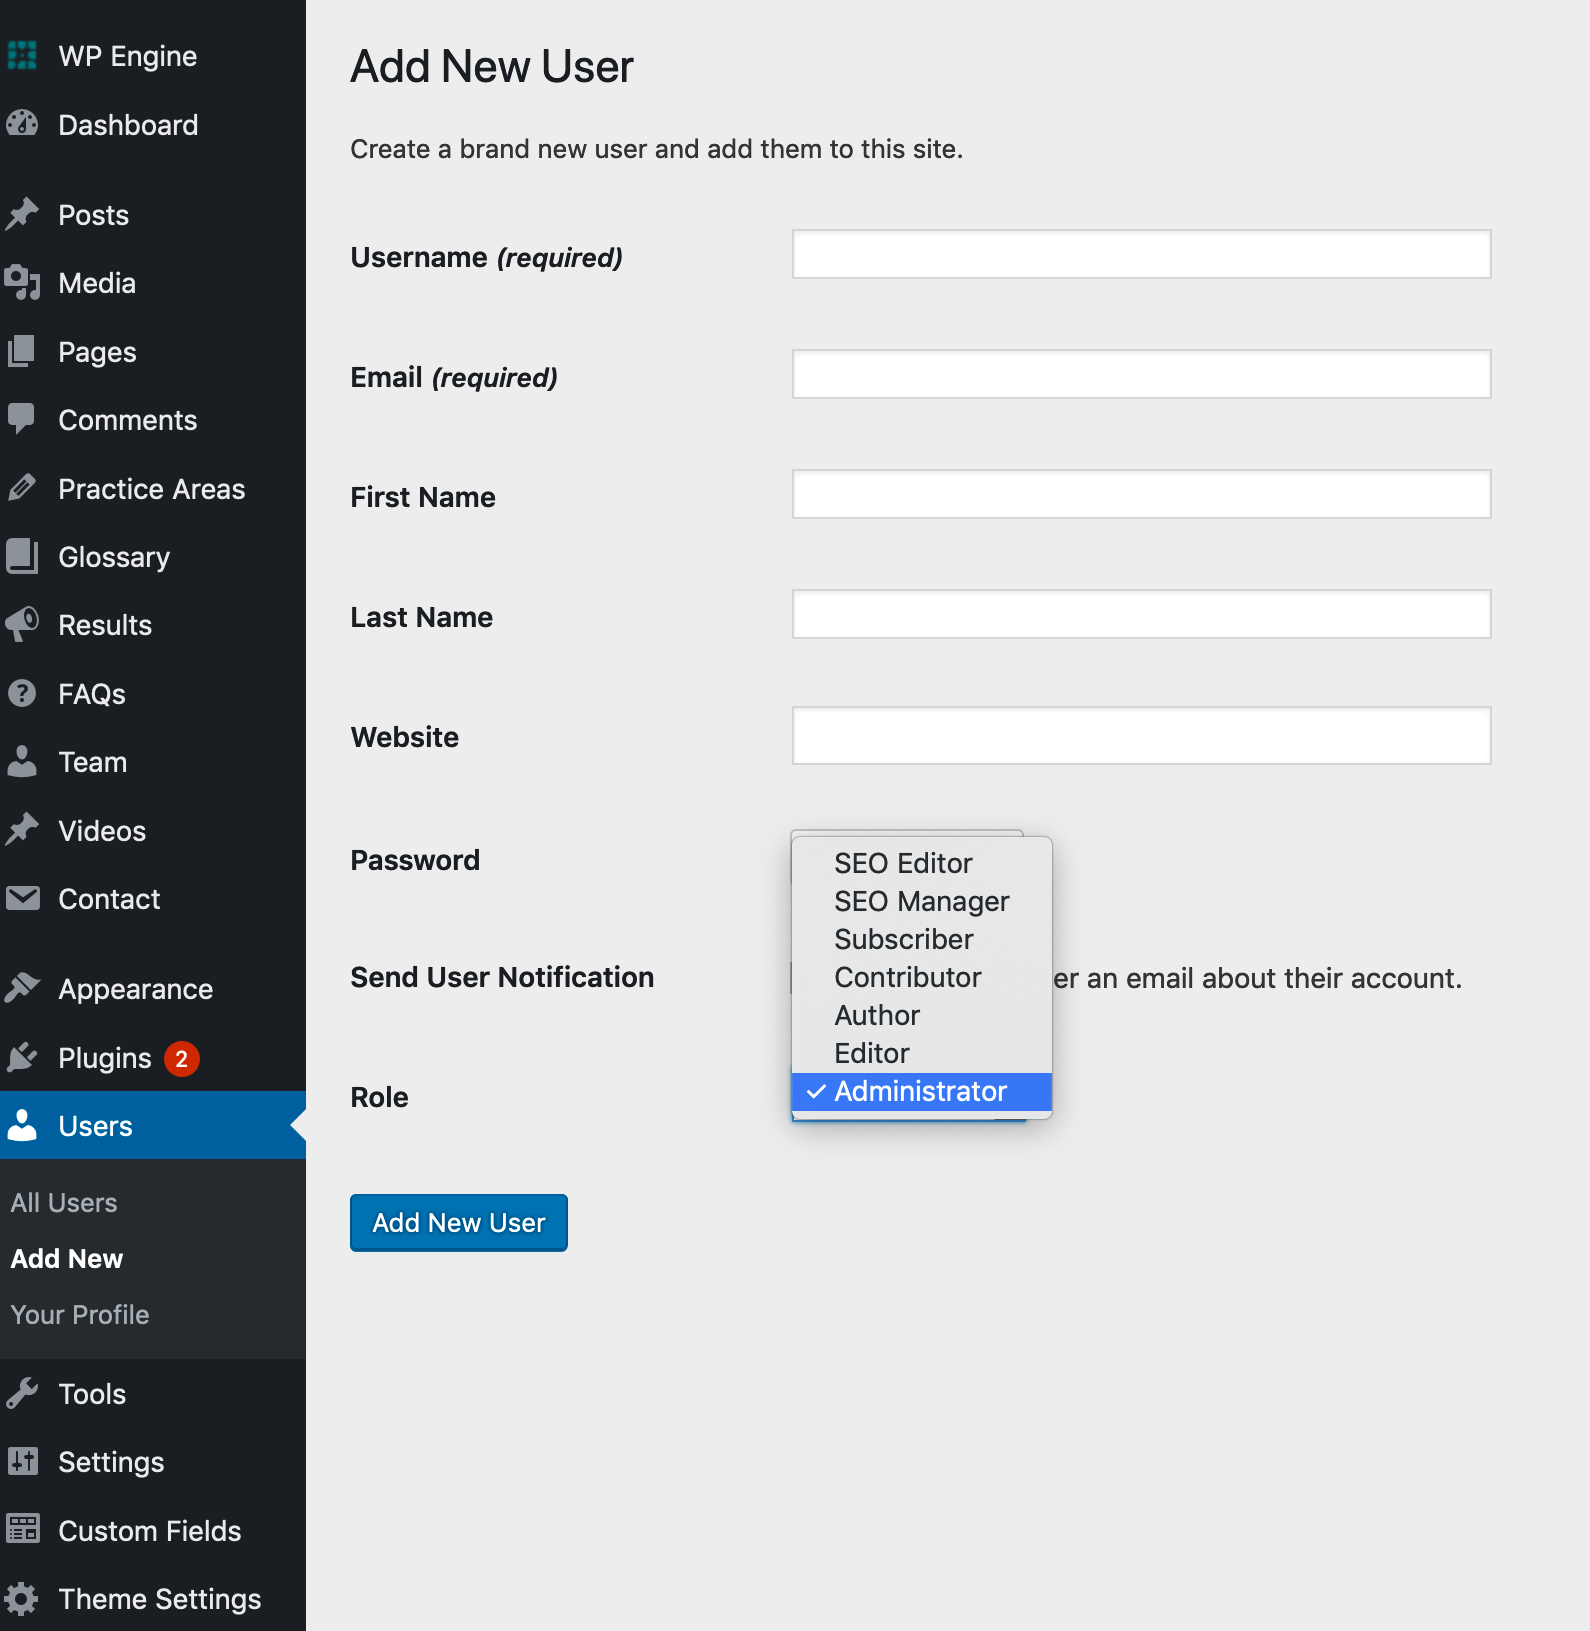 screenshot of wordpress add new user screen with roles expanded